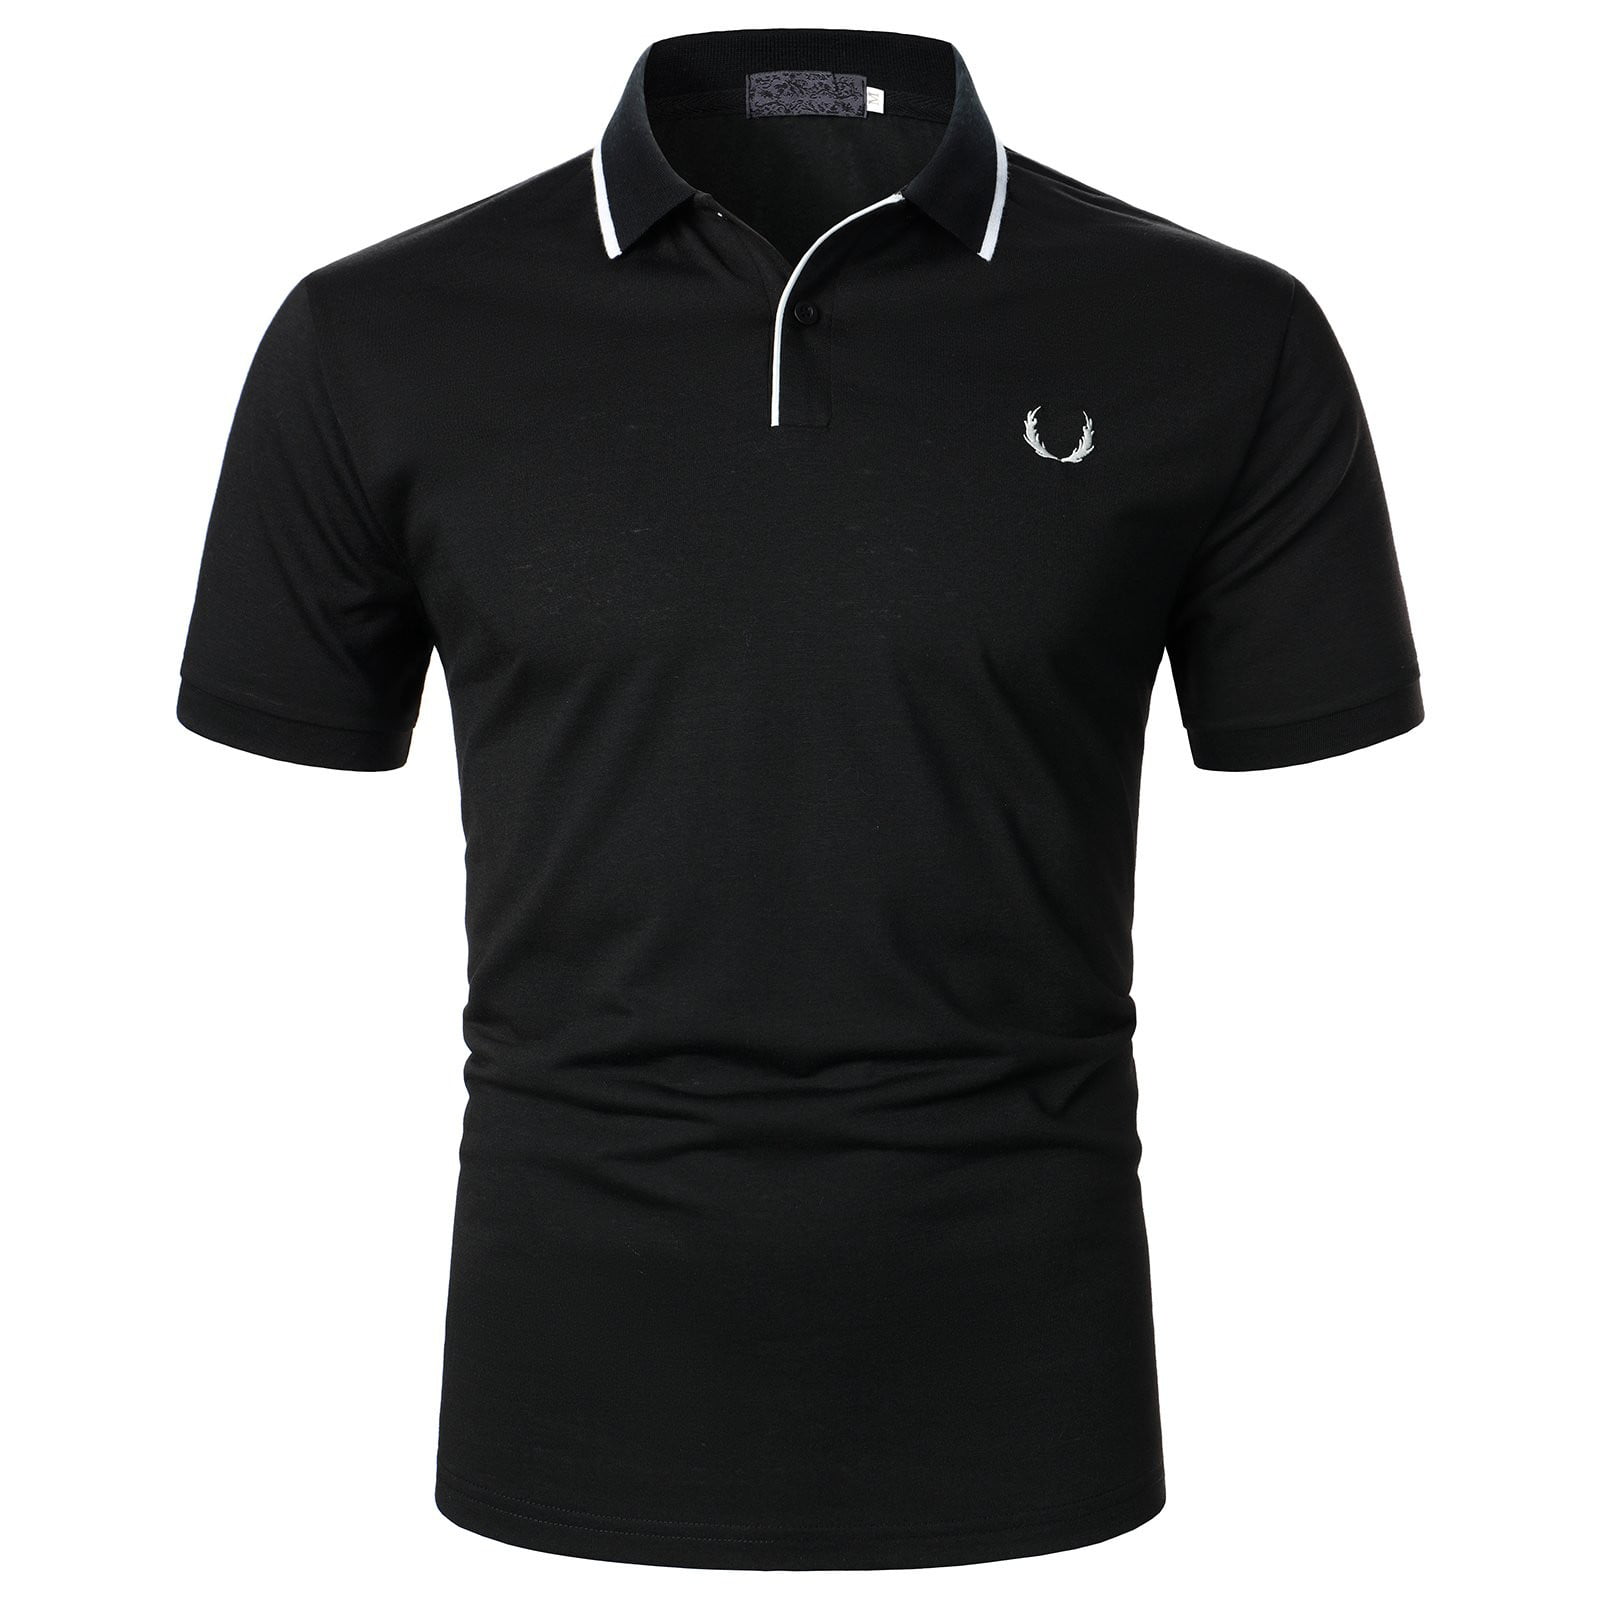 Pimfylm Mens Polo Polo Shirt Golf Shirts for Men Dry Fit Short Sleeve ...